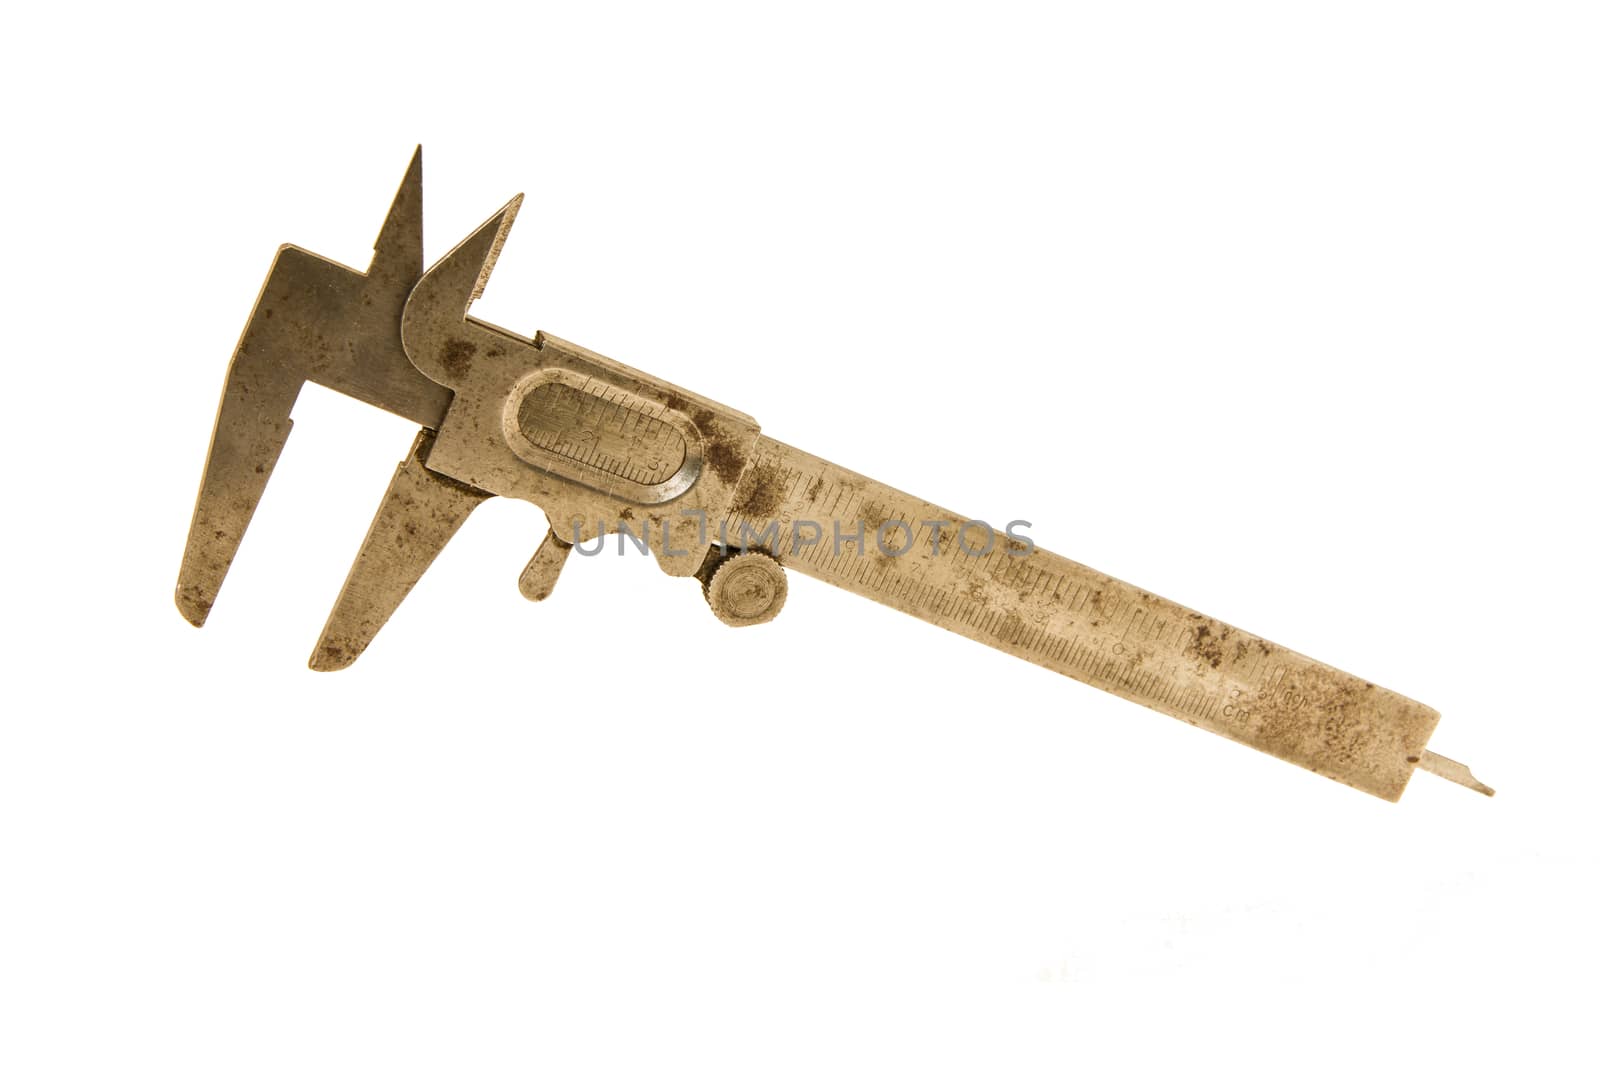 Old rusty caliper, isolated on a white background by huntz